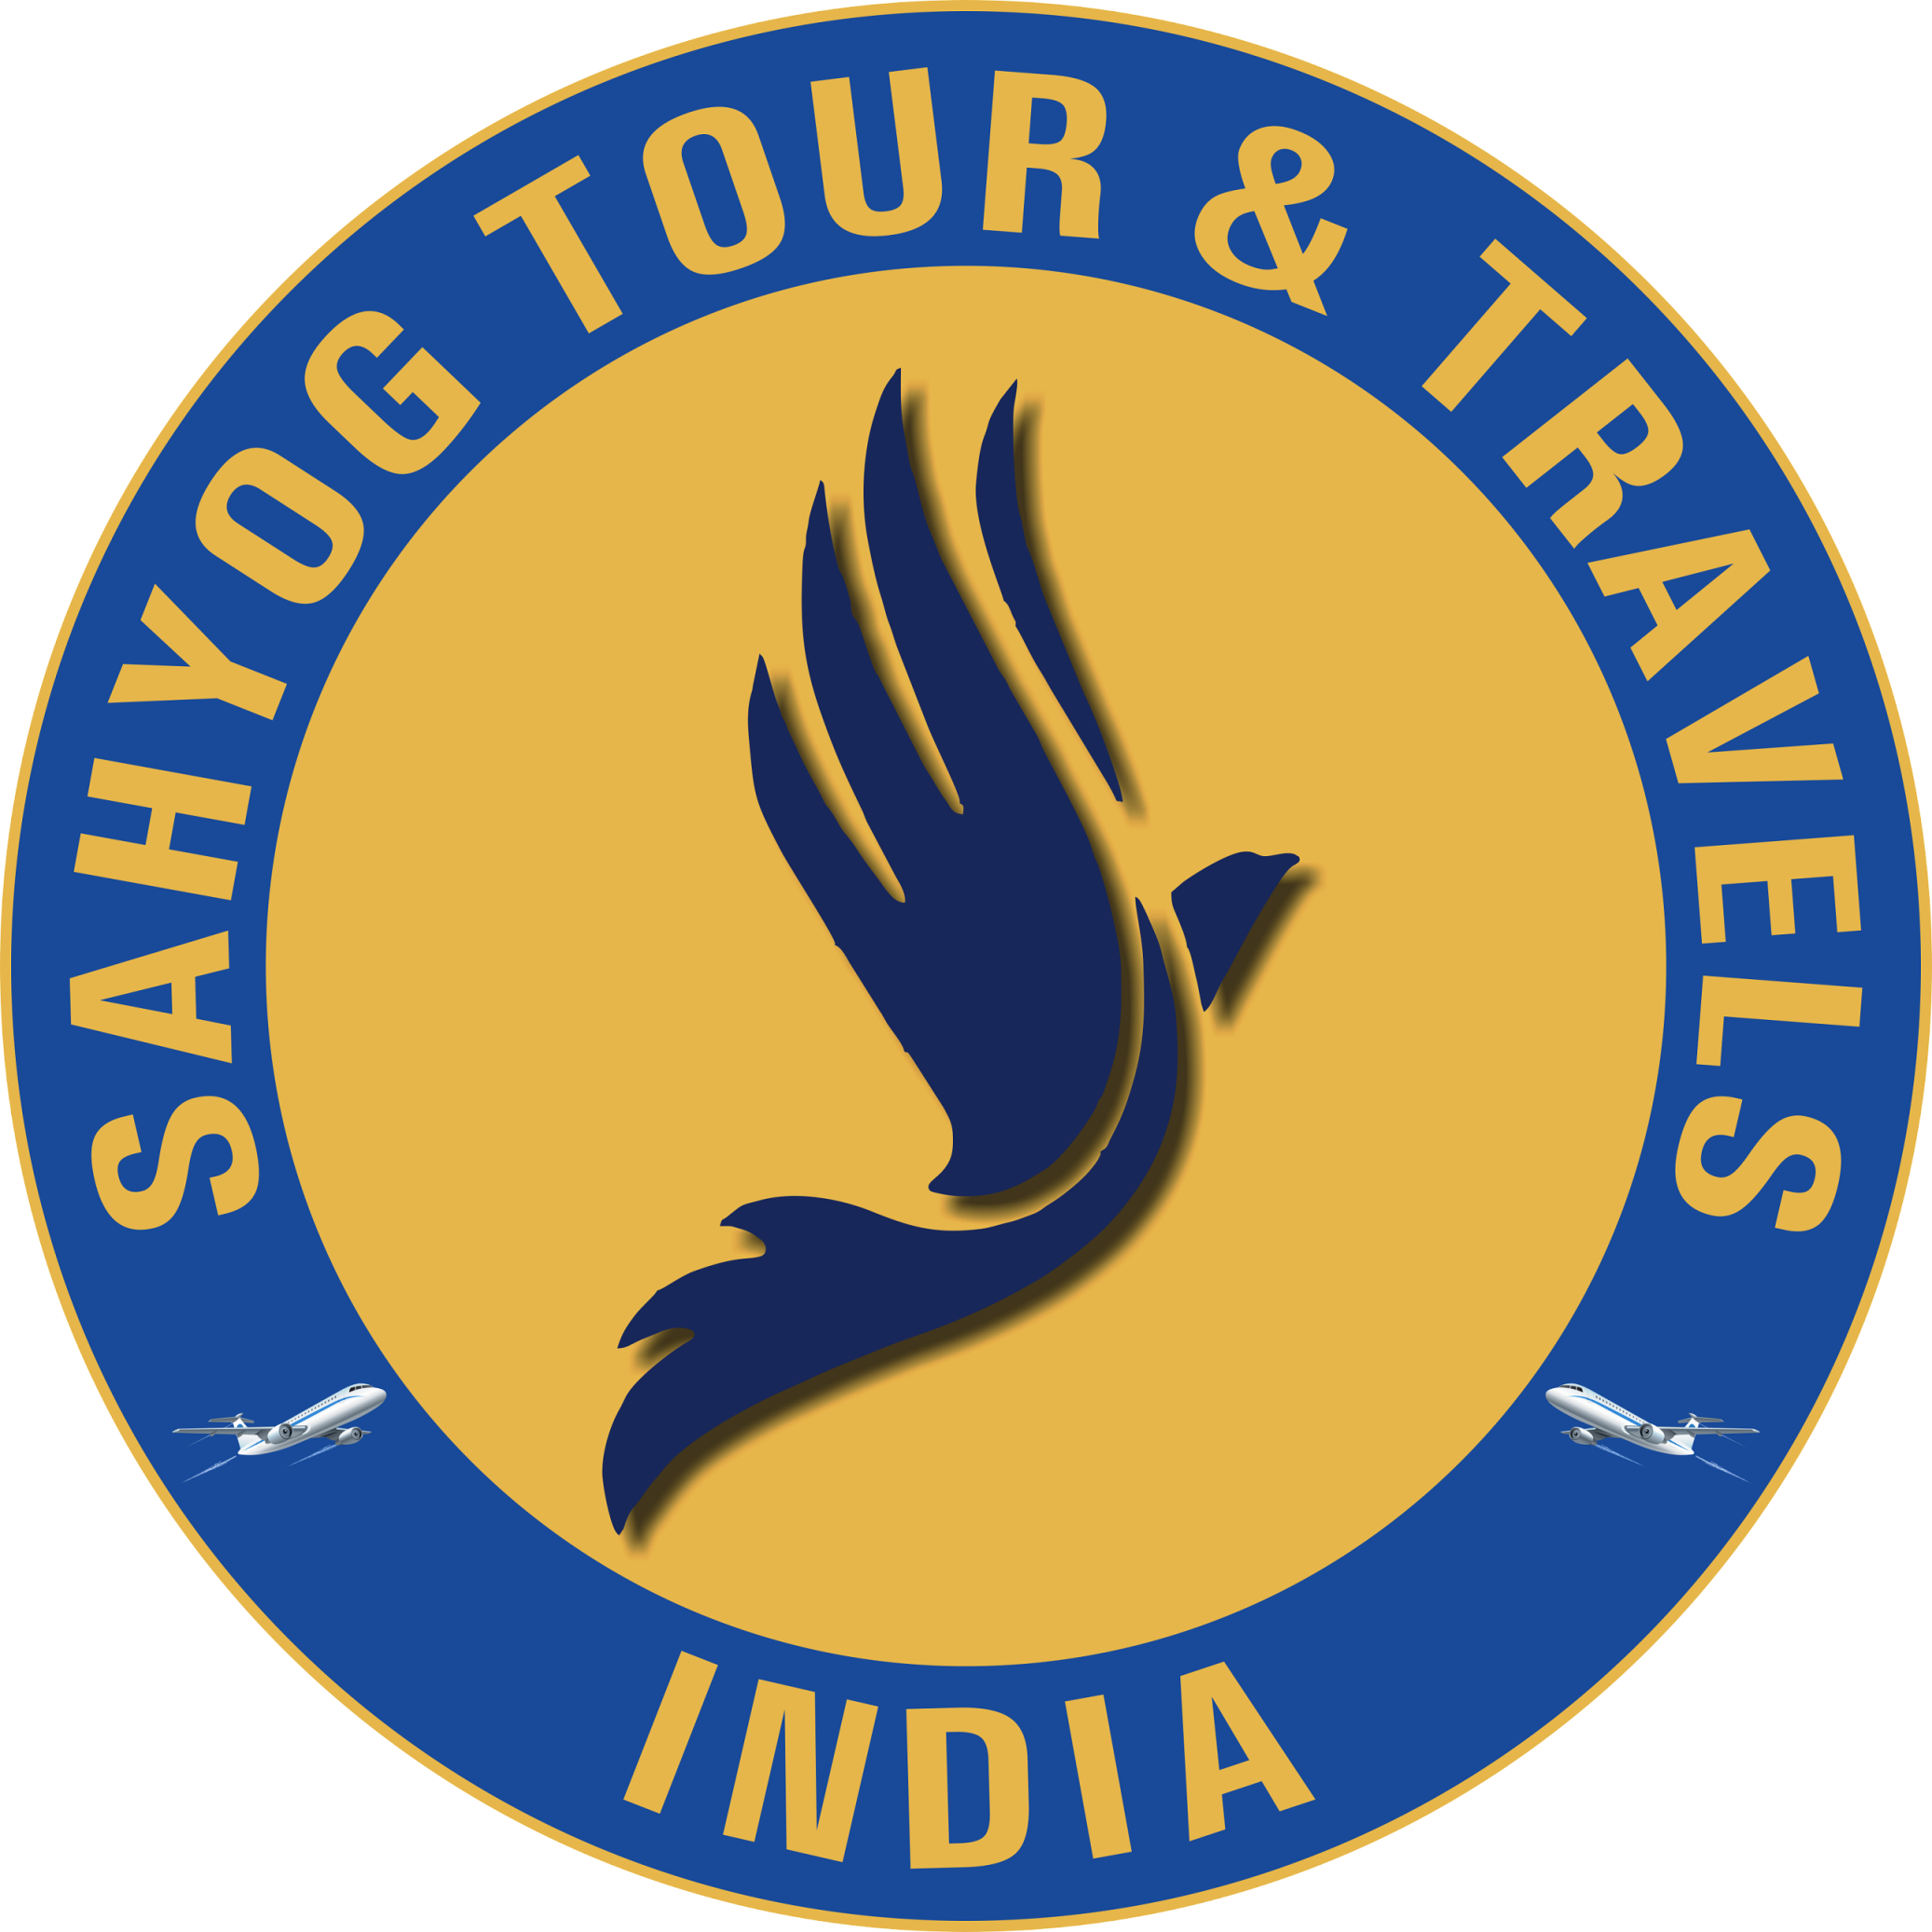 hisar tour and travels contact number